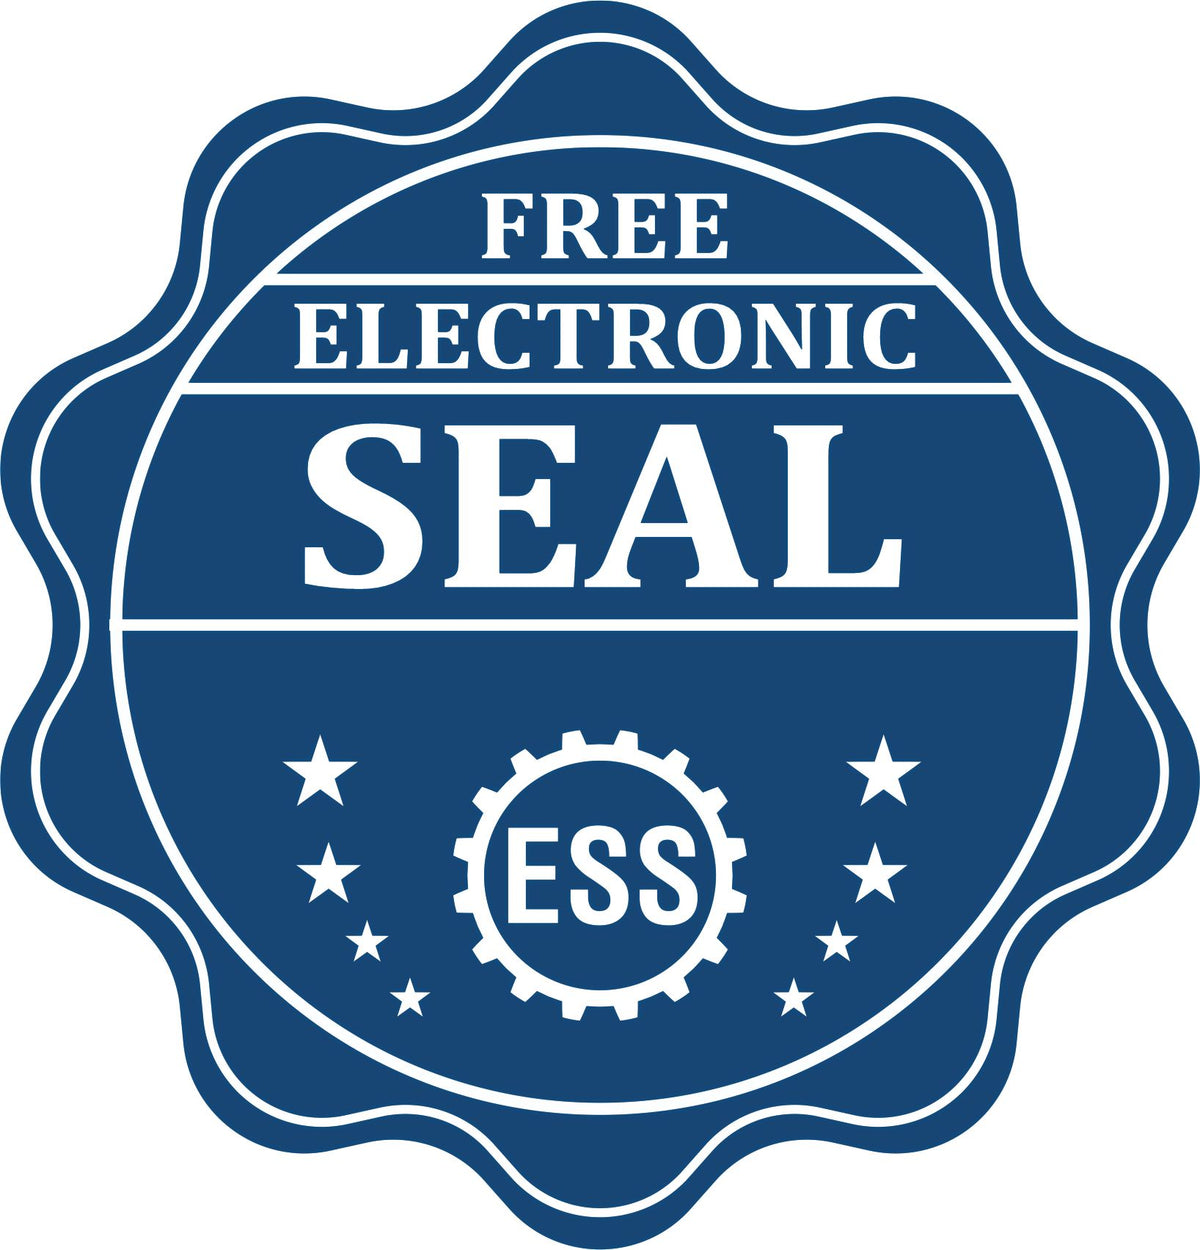 A badge showing a free electronic seal for the Heavy Duty Cast Iron Alaska Engineer Seal Embosser with stars and the ESS gear on the emblem.